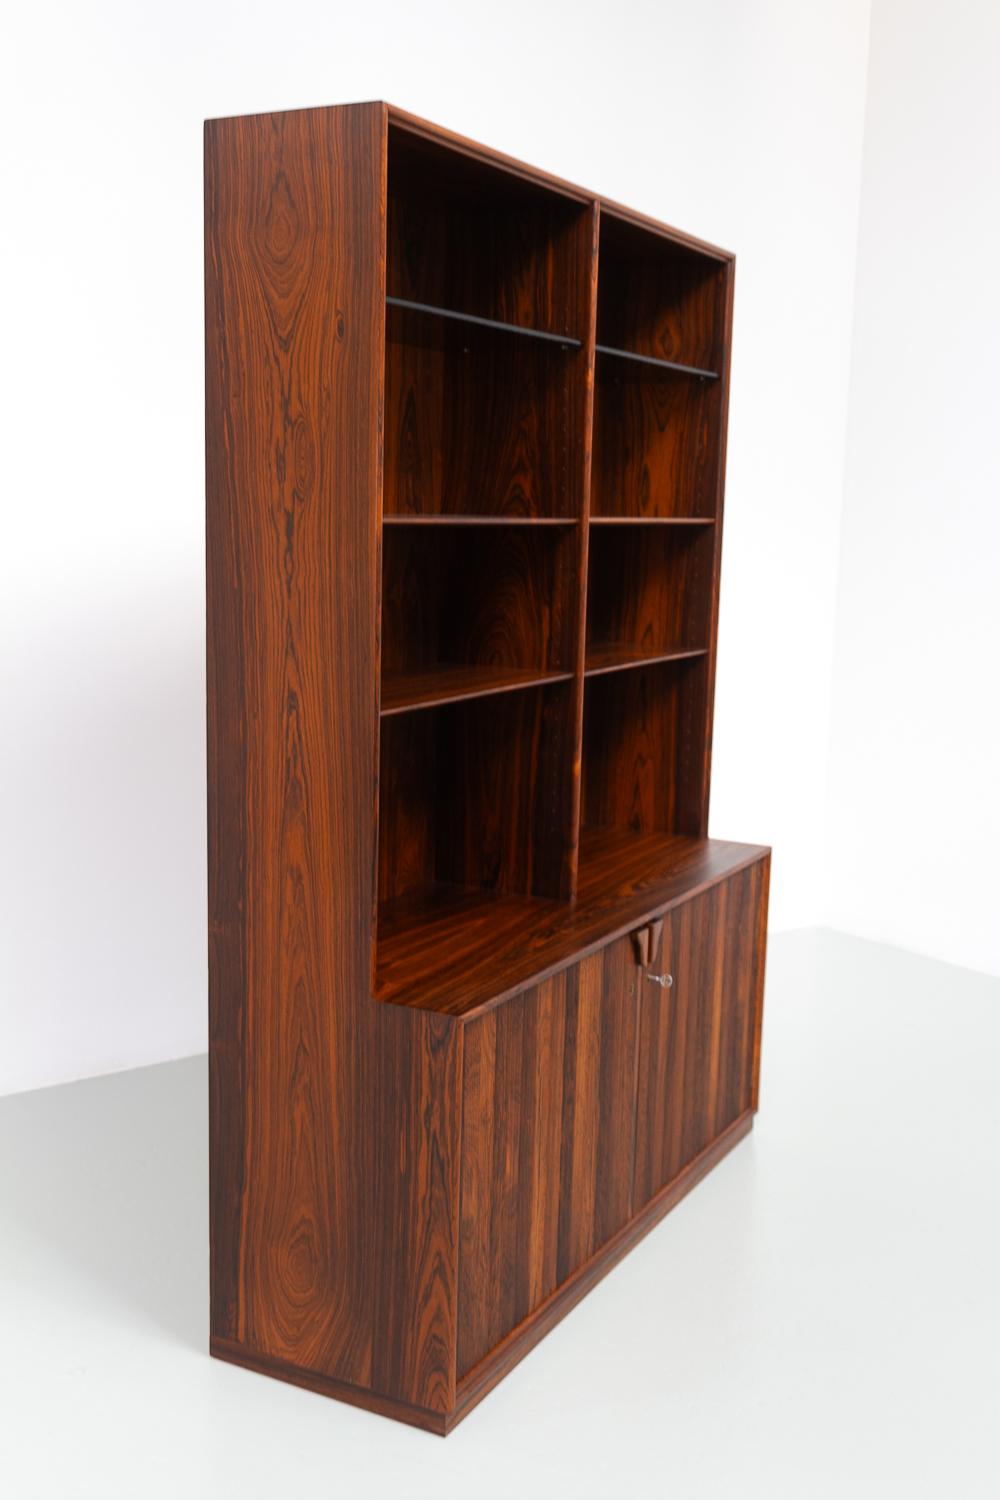 Danish Modern Rosewood Bookcase by Frode Holm for Illums, 1950s. For Sale 7